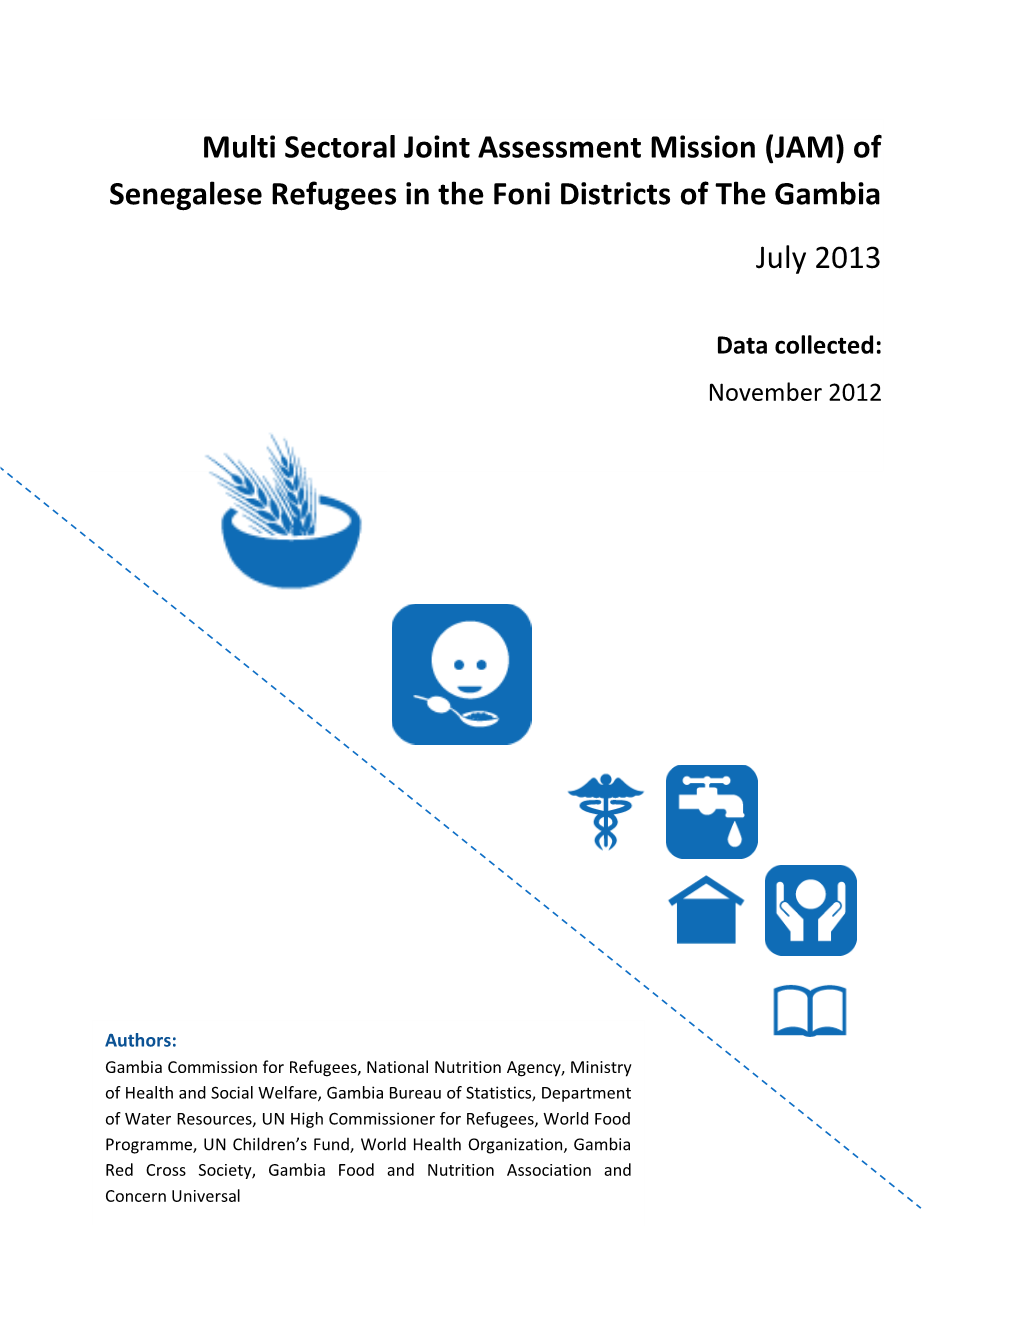 JAM) of Senegalese Refugees in the Foni Districts of the Gambia July 2013